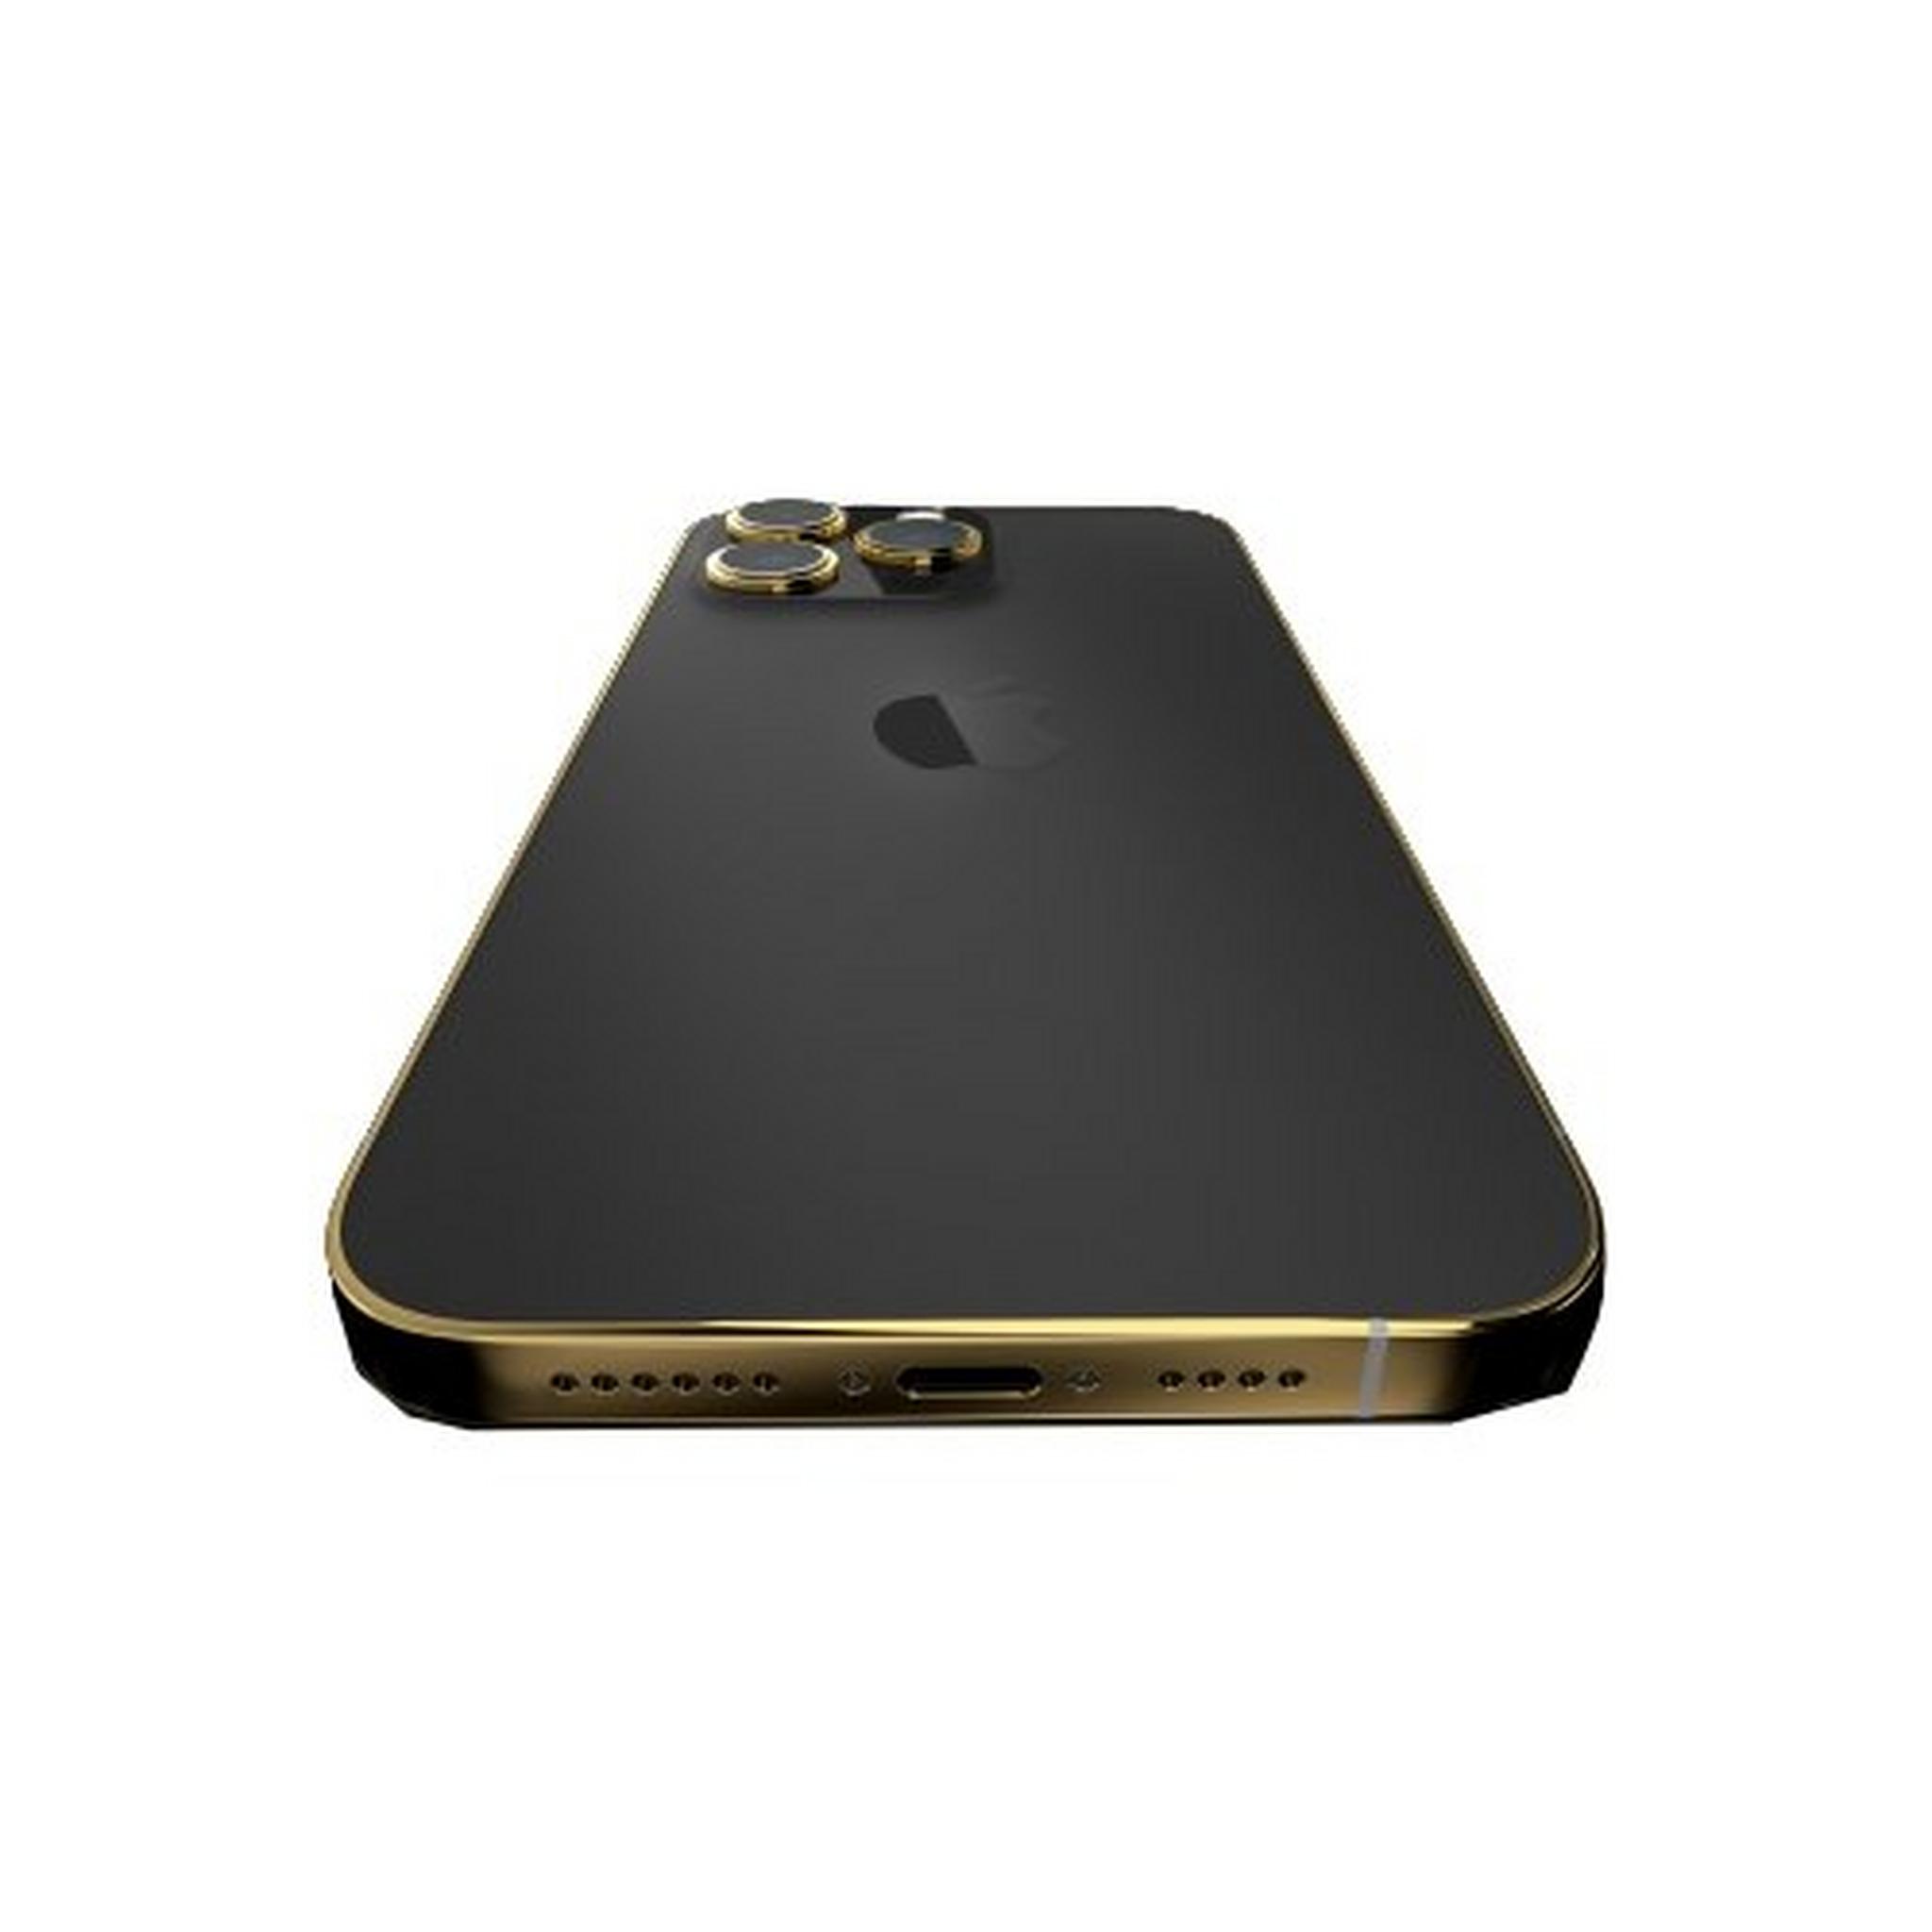 Givori iPhone 14 Pro Max 256GB Phone - Gold Plated Frame - Black